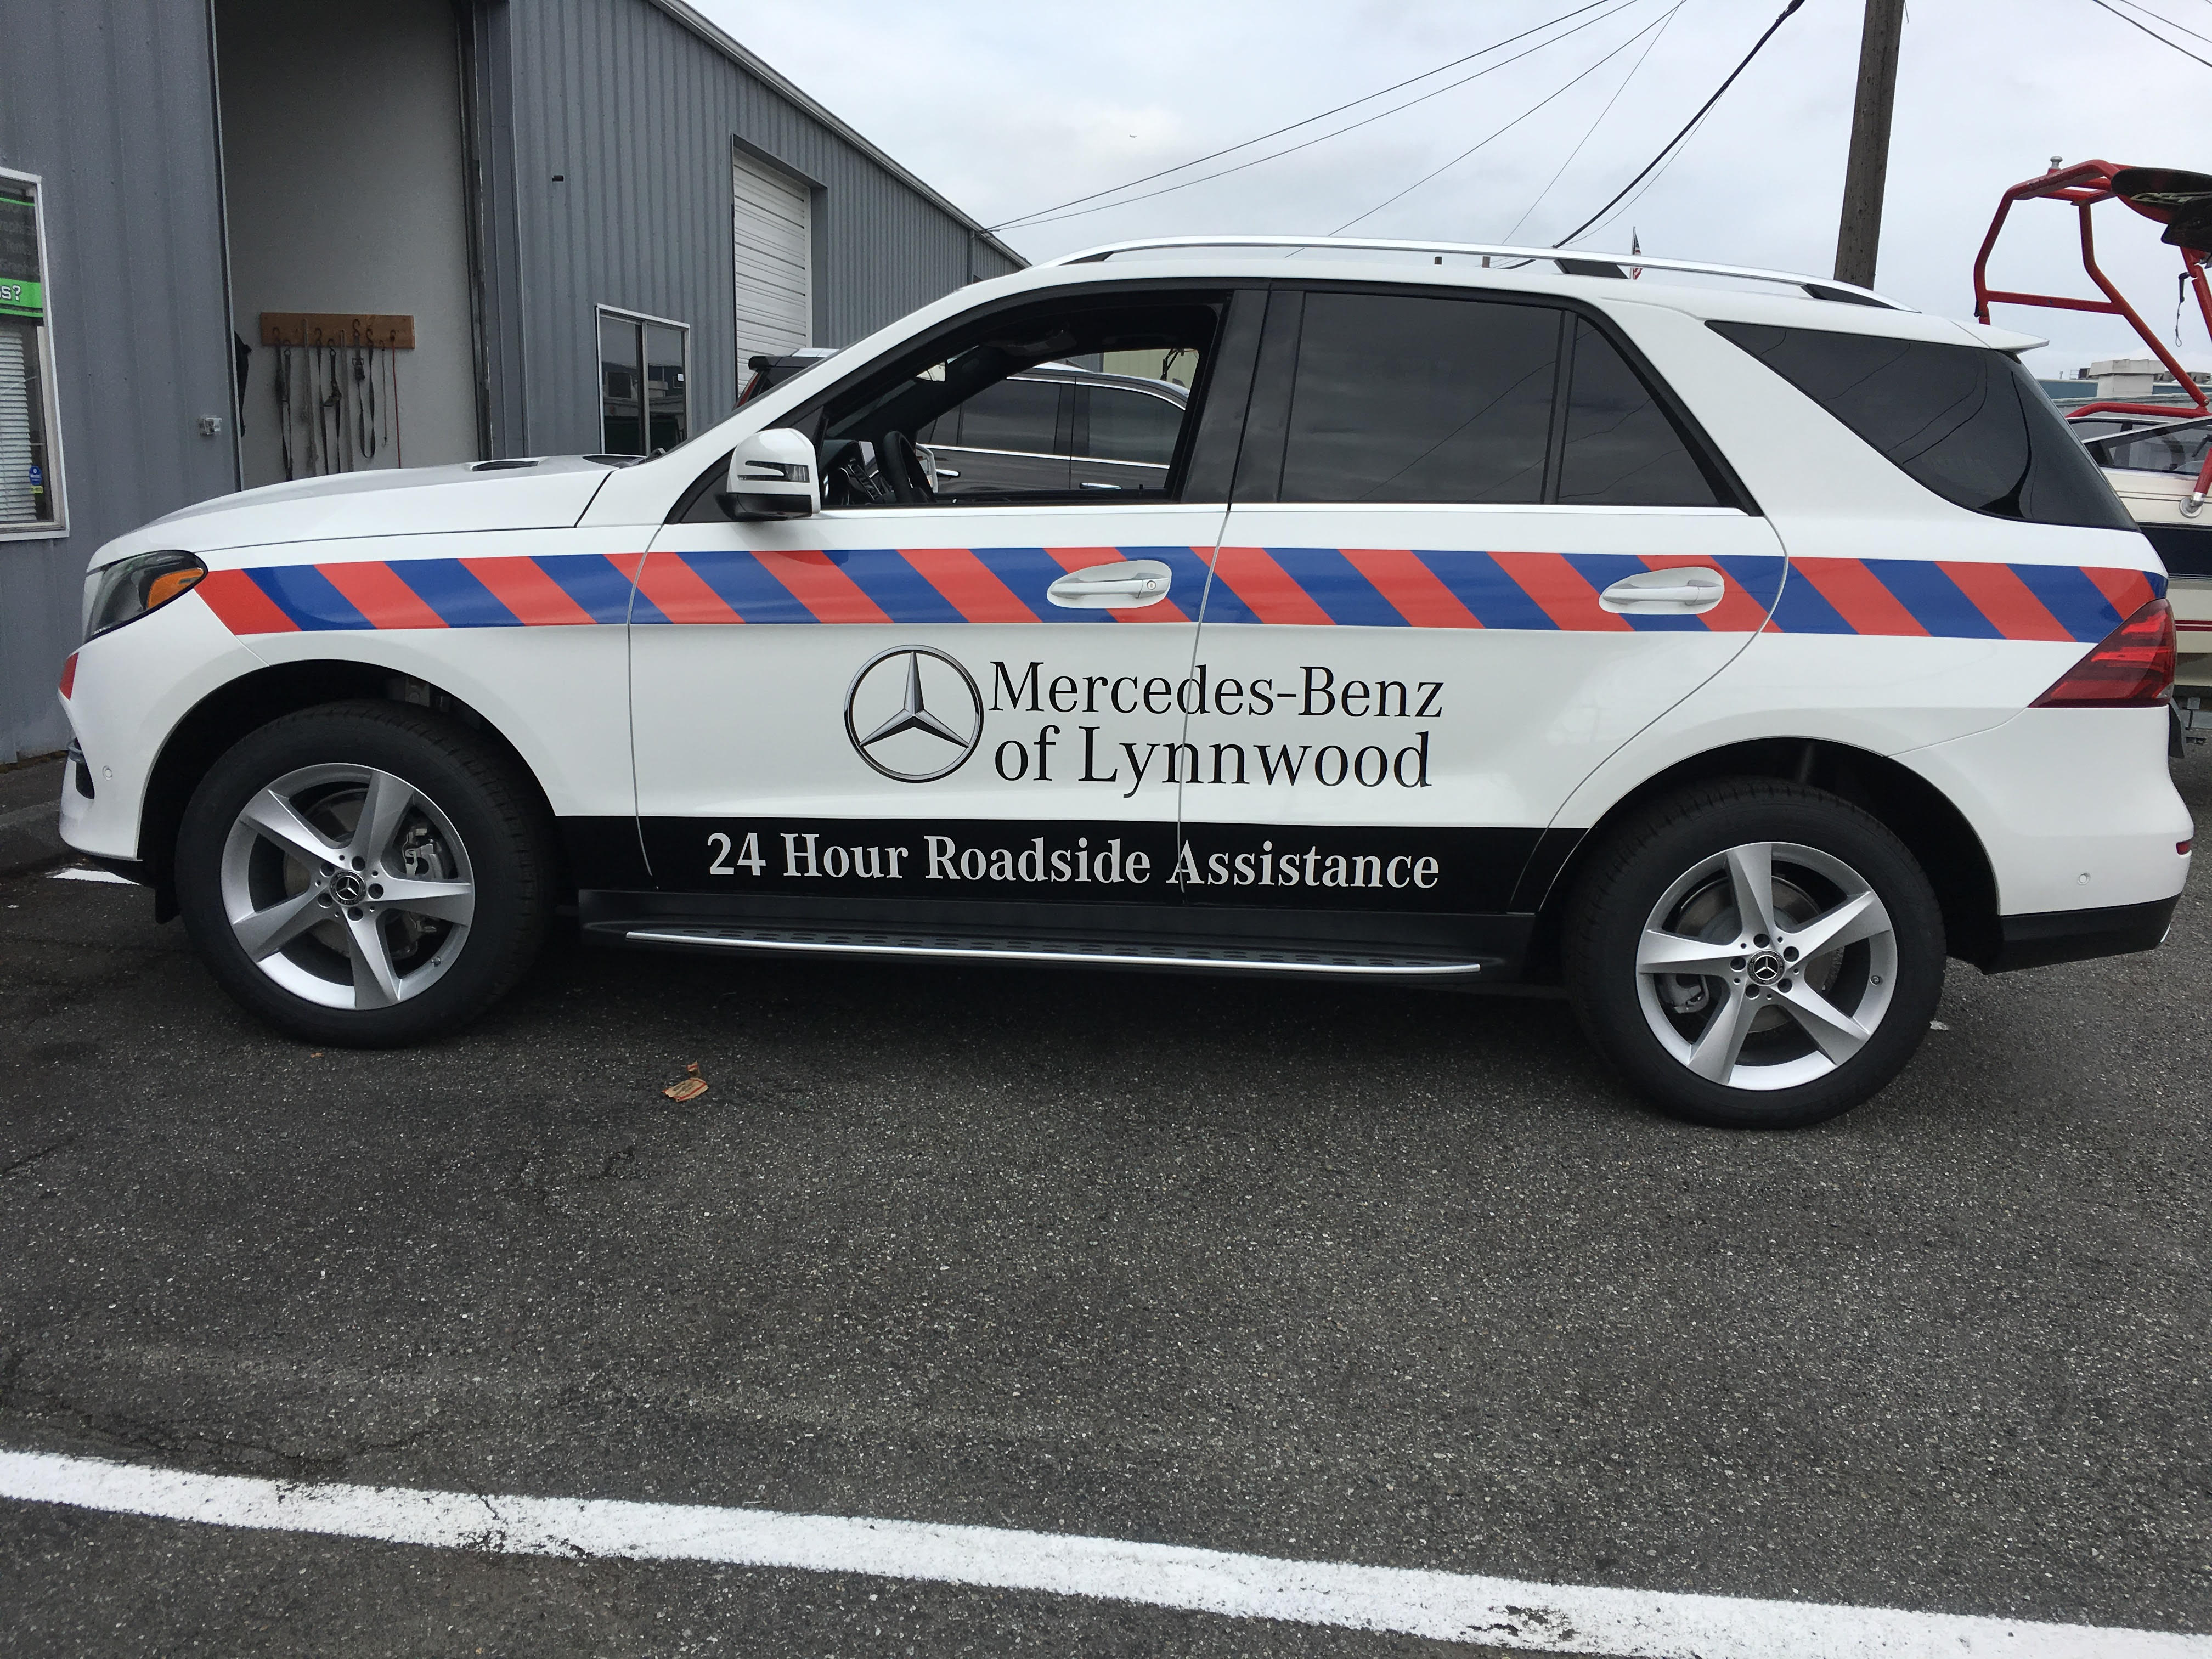 Reflective graphics for Mercedes-Benz of Lynnwood